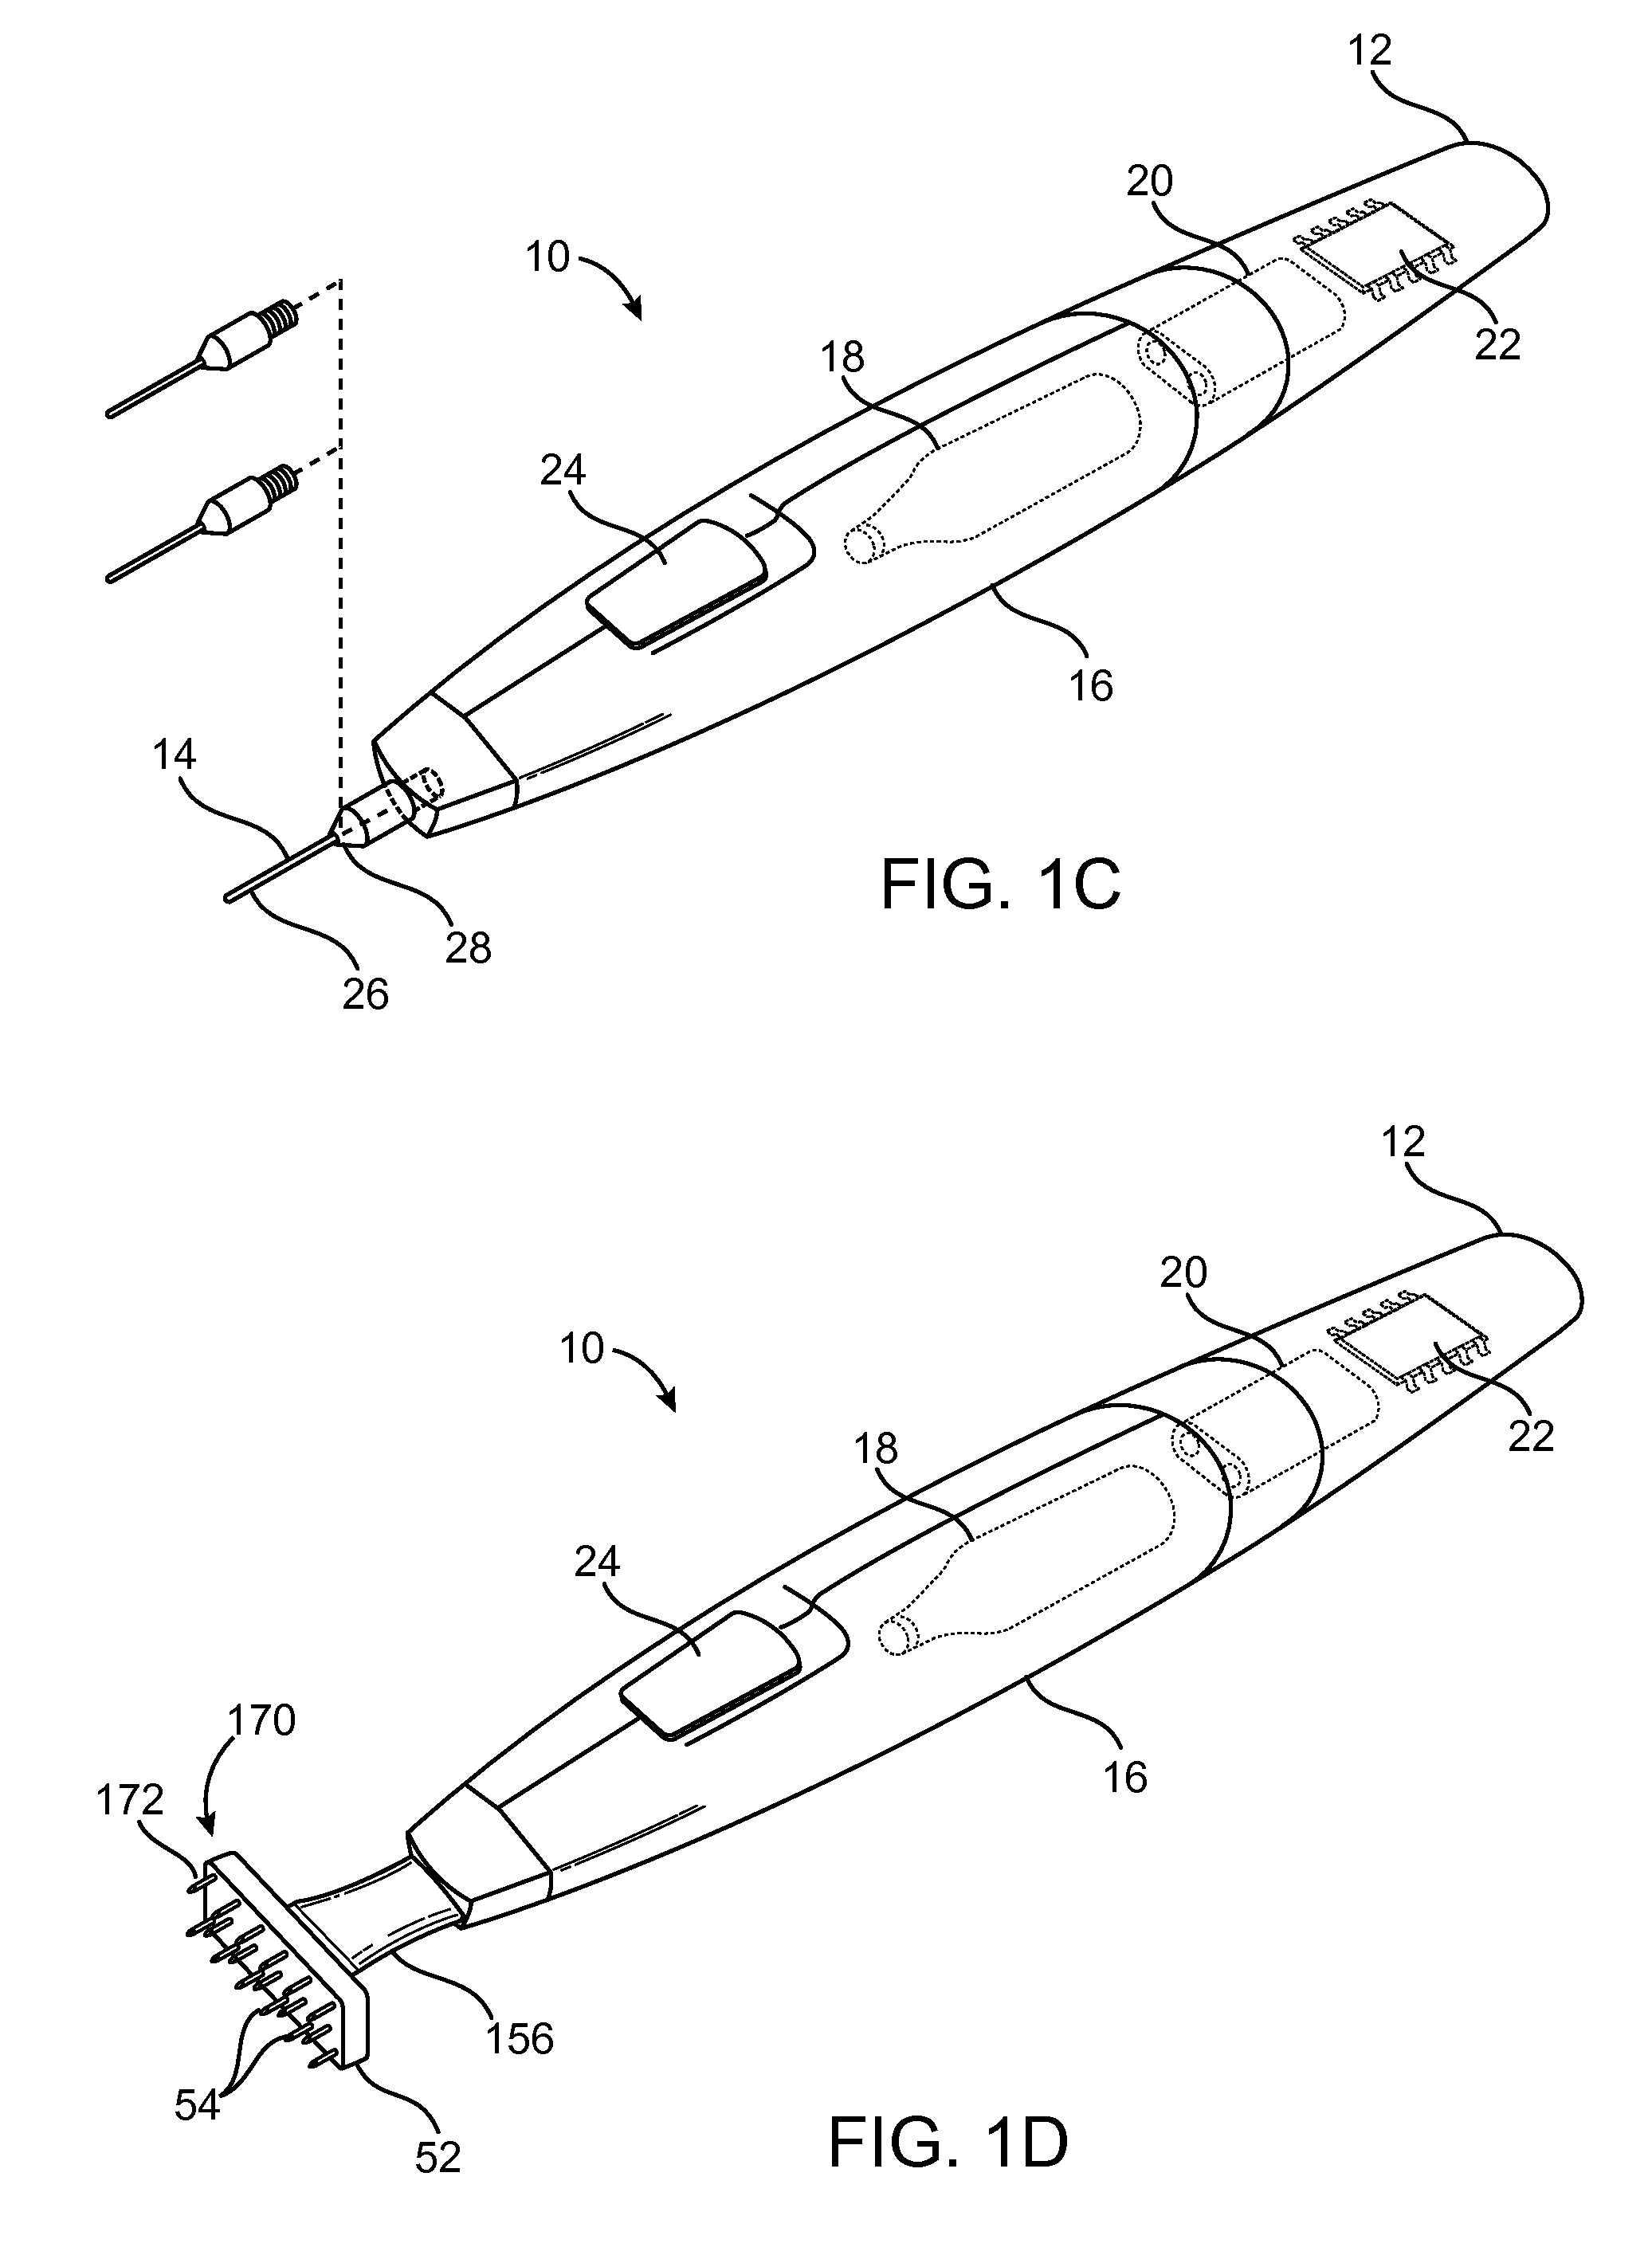 Methods and apparatus for cryogenically treating multiple tissue sites with a single puncture